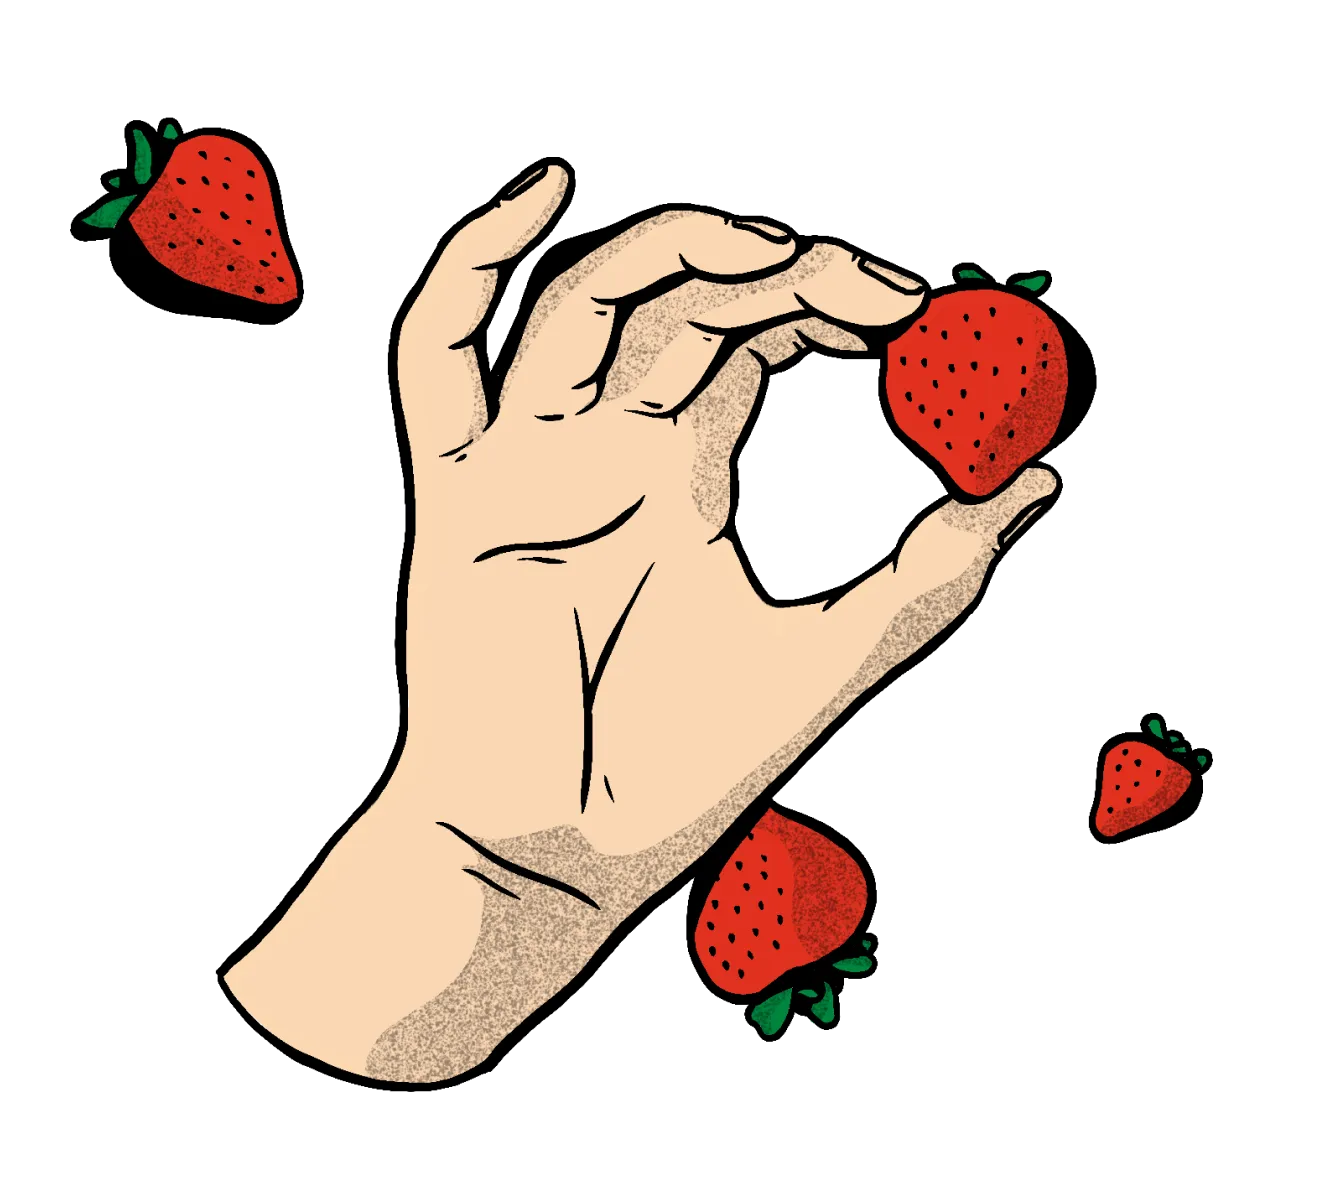 a hand holding a strawberry